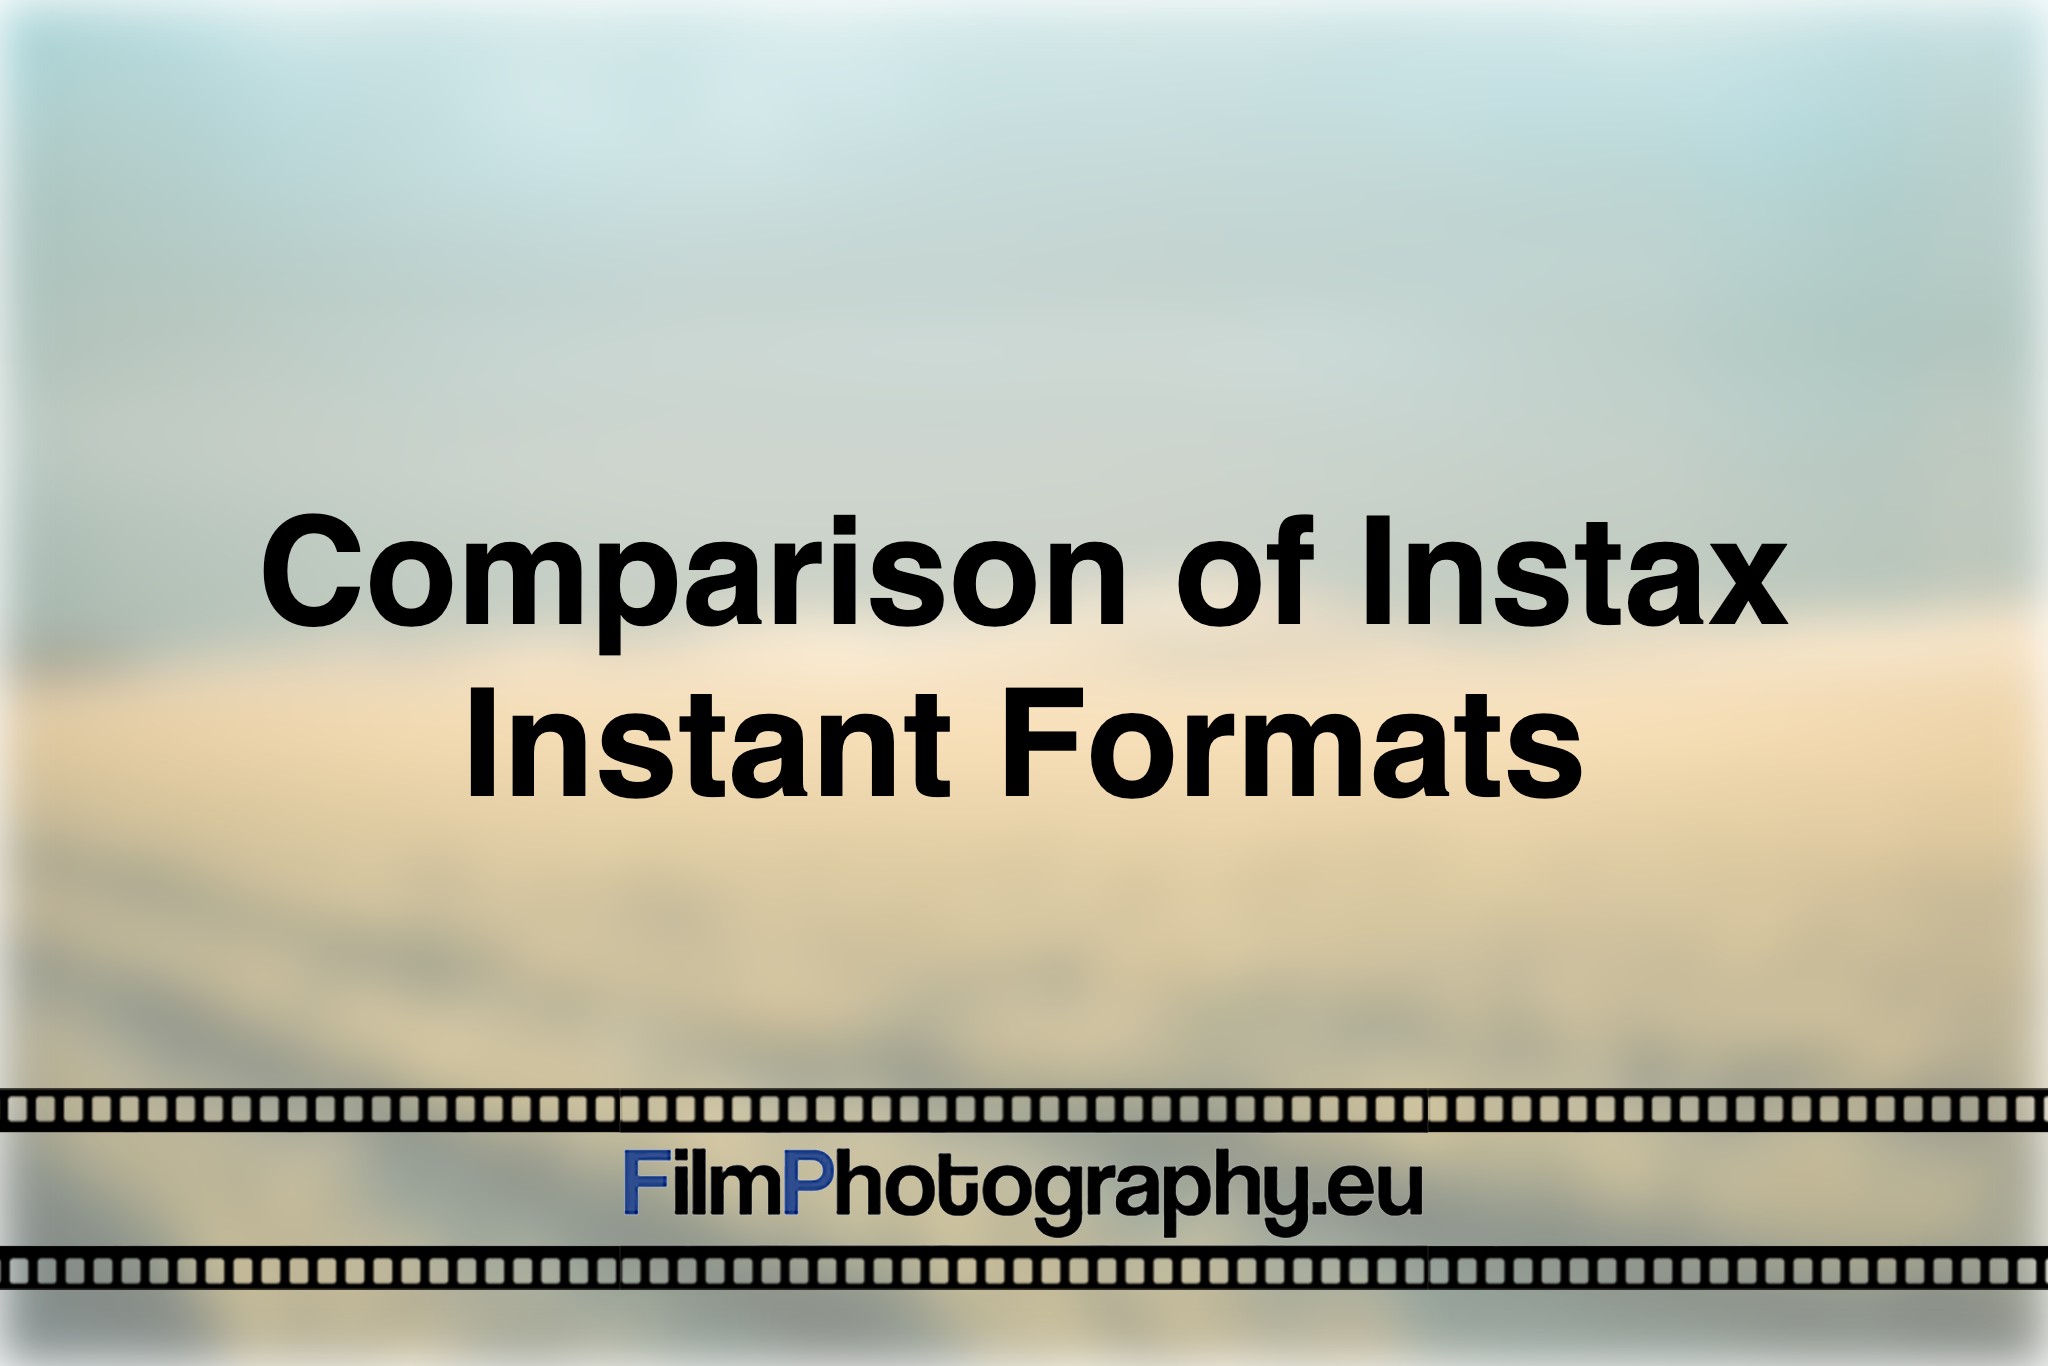 comparison-of-instax-instant-formats-photo-bnv